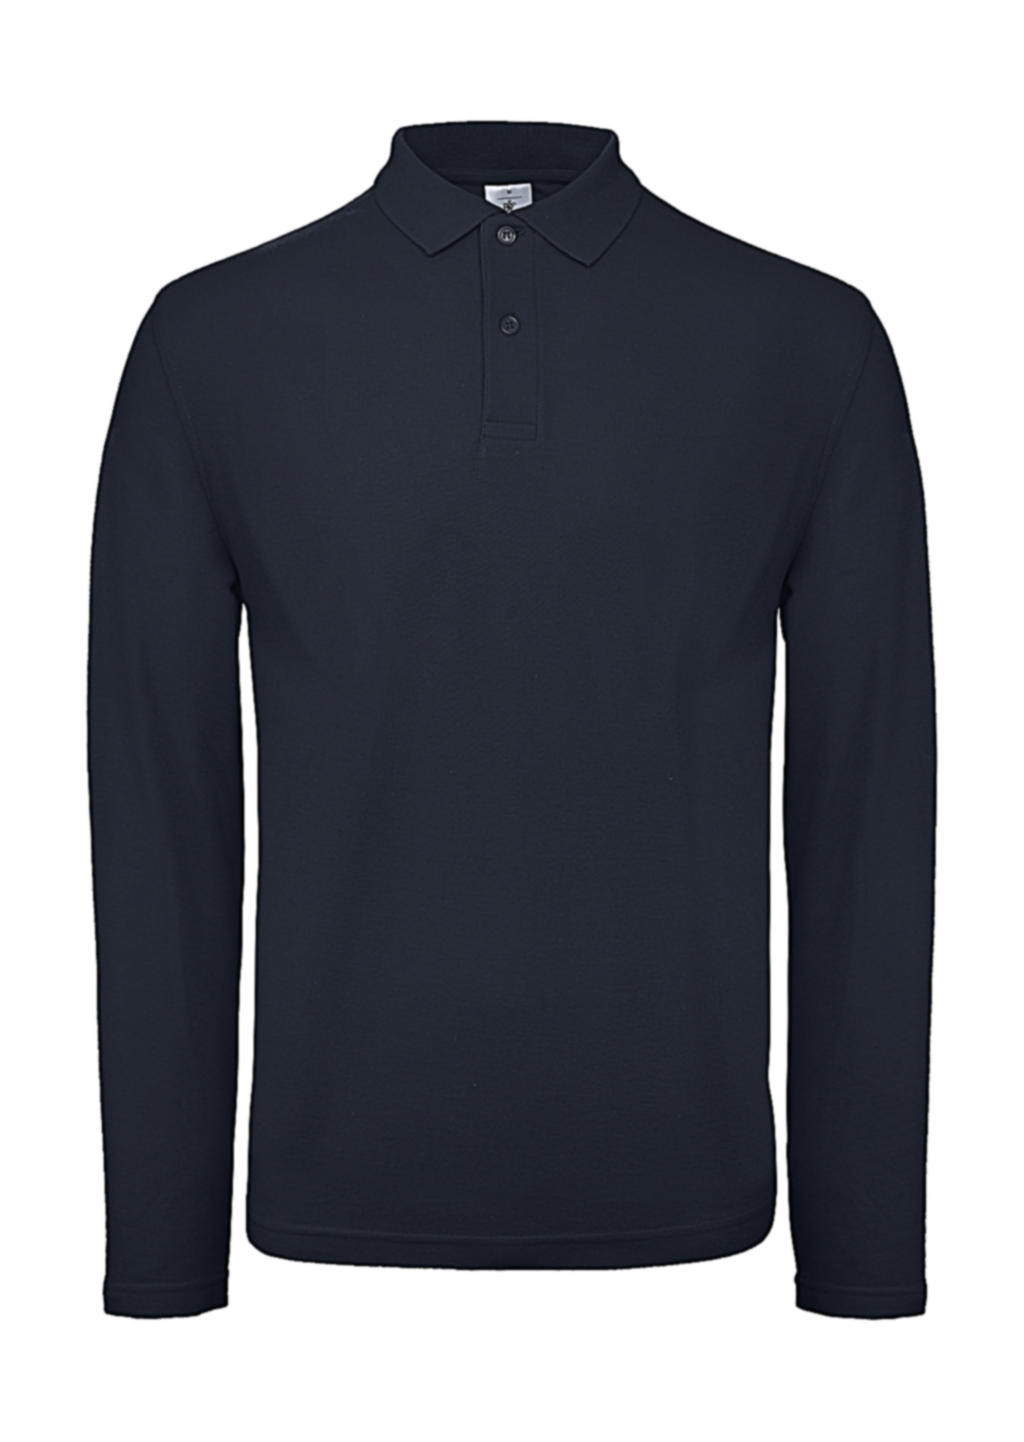  ID.001 LSL Polo in Farbe Navy